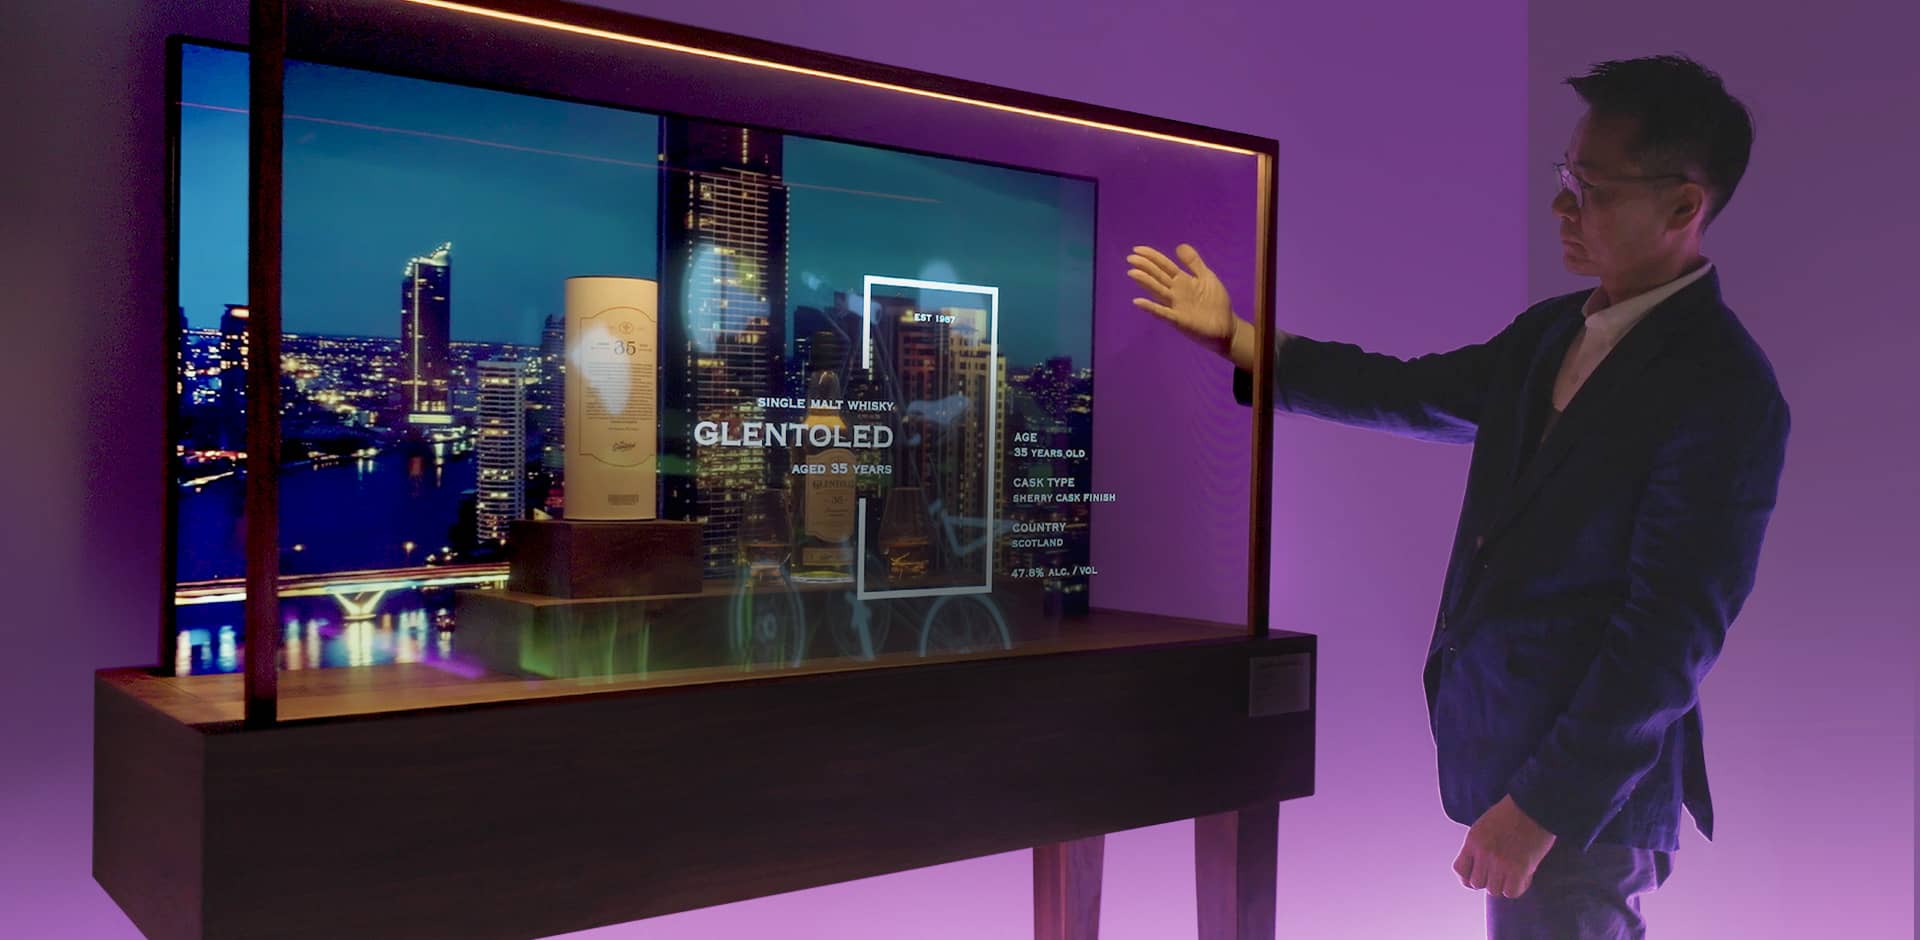 I've looked through LG's new transparent OLED TV and seen